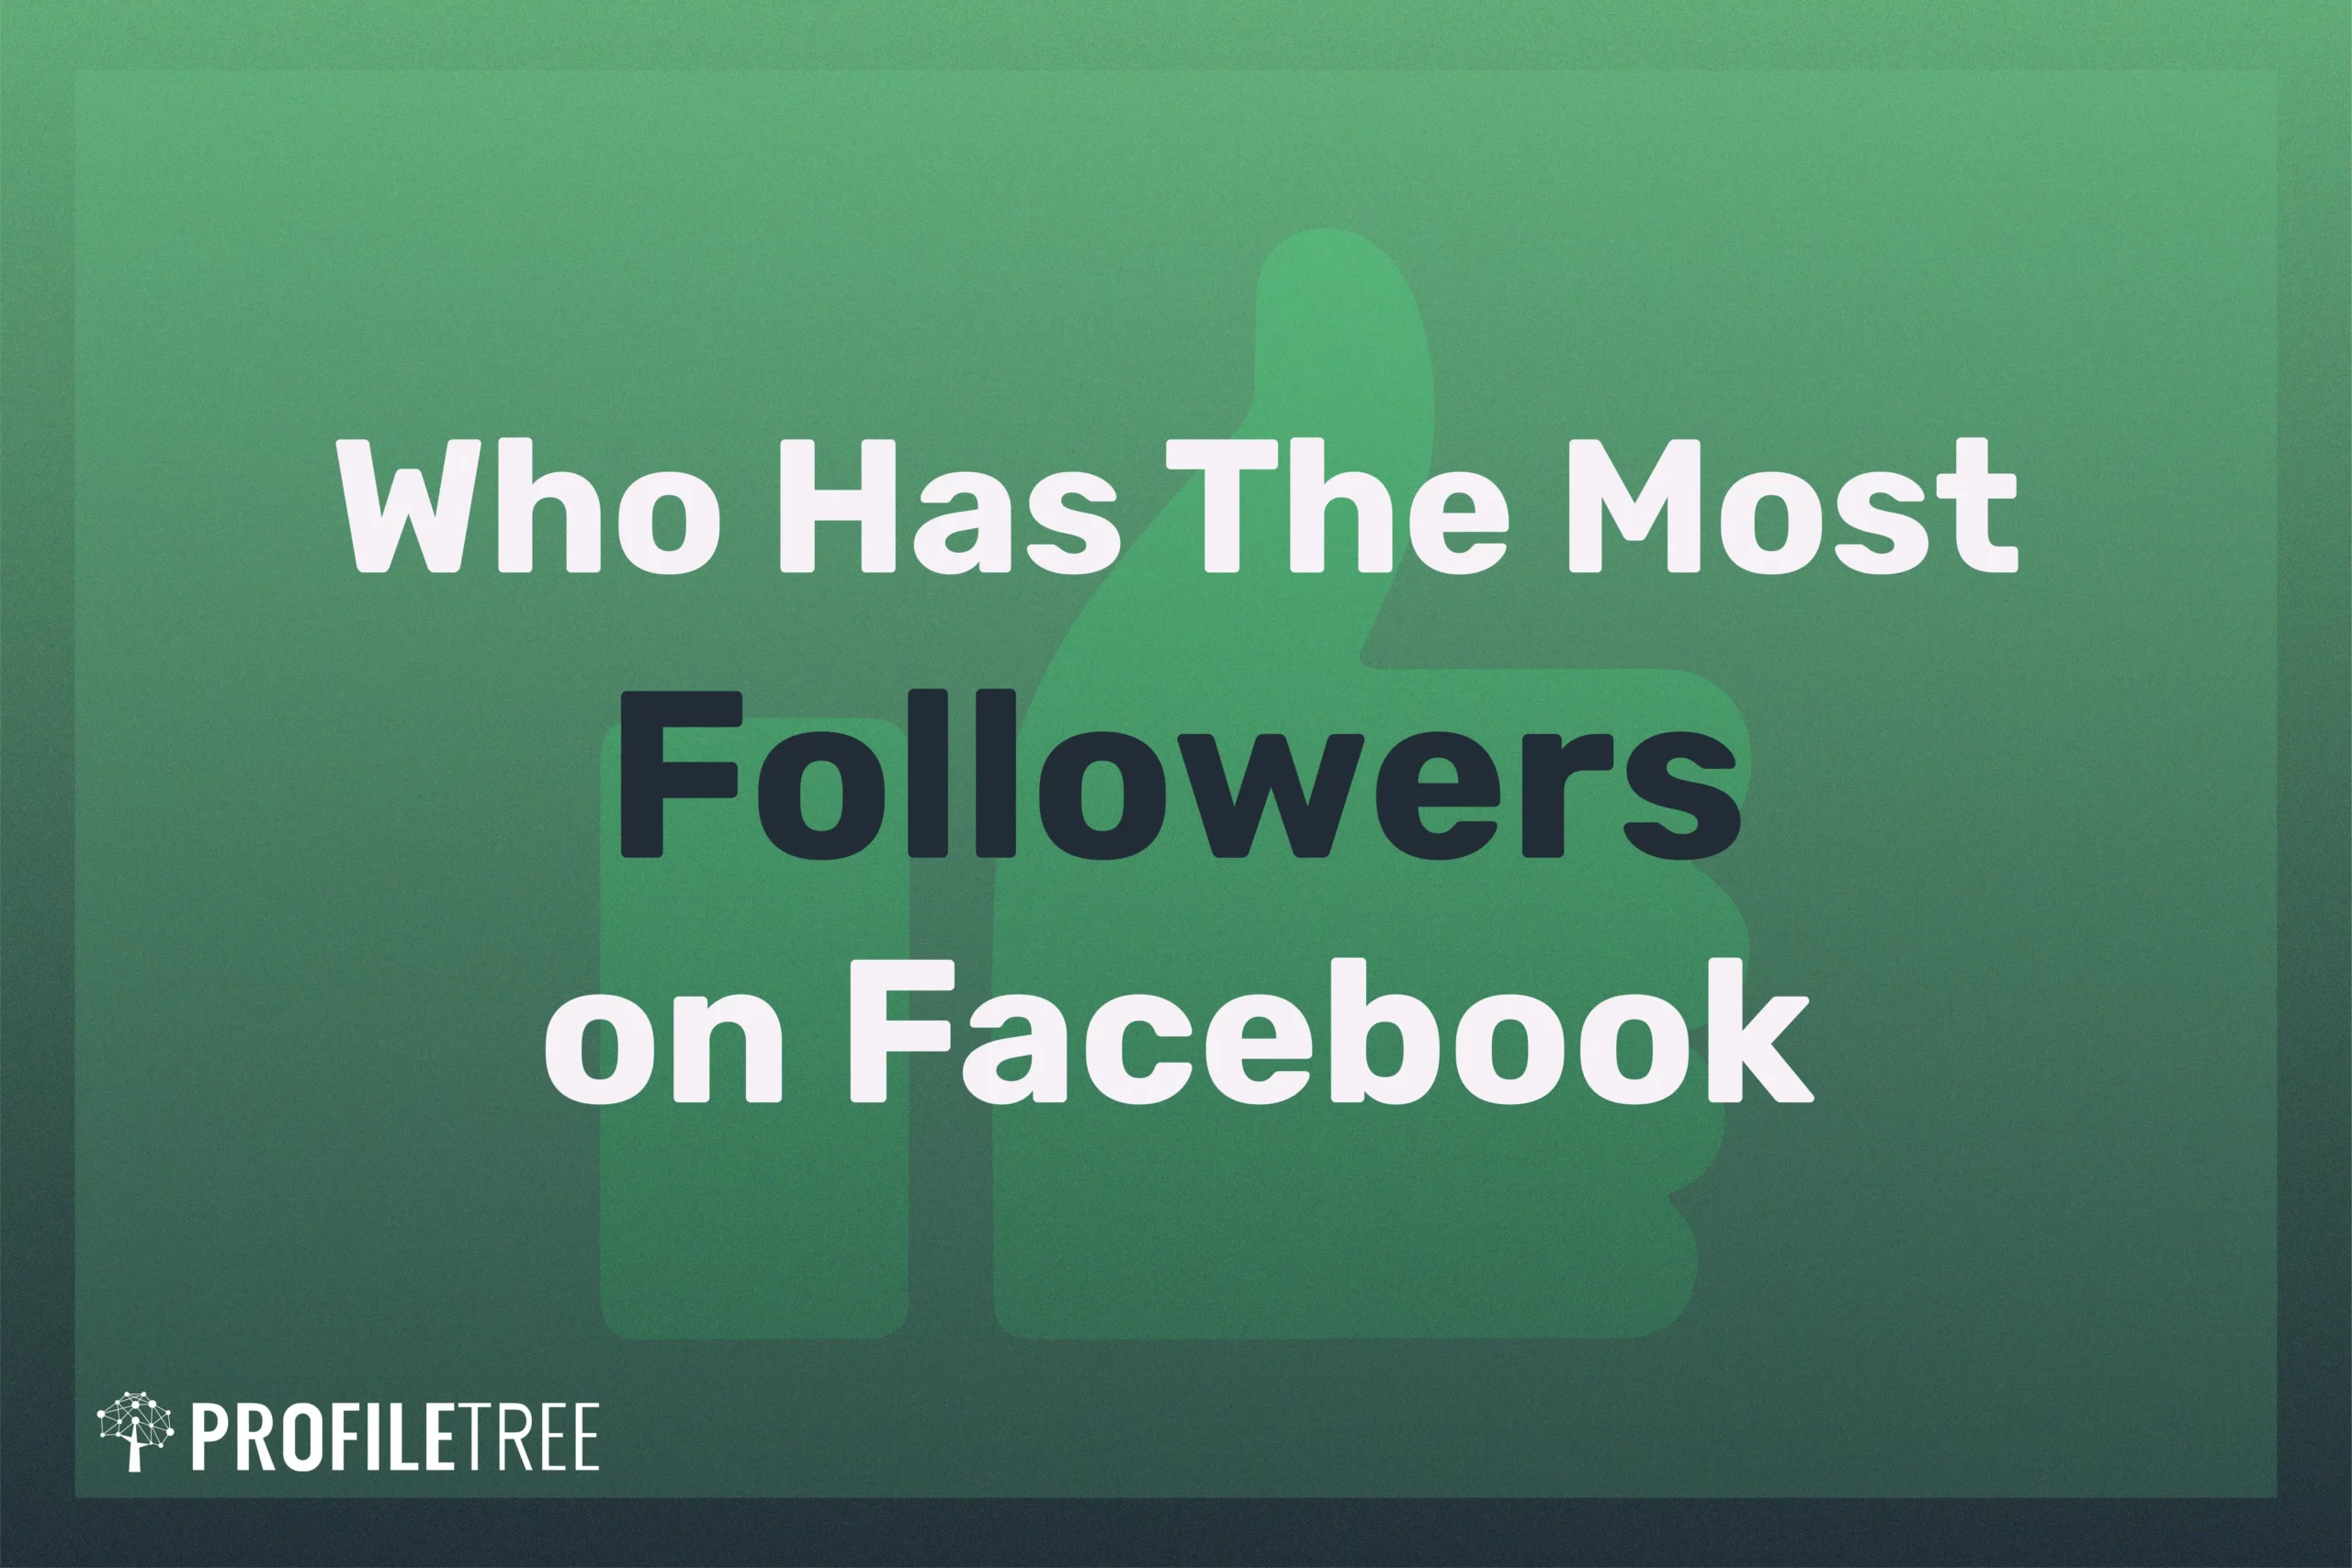 Who Has The Most Followers on Facebook